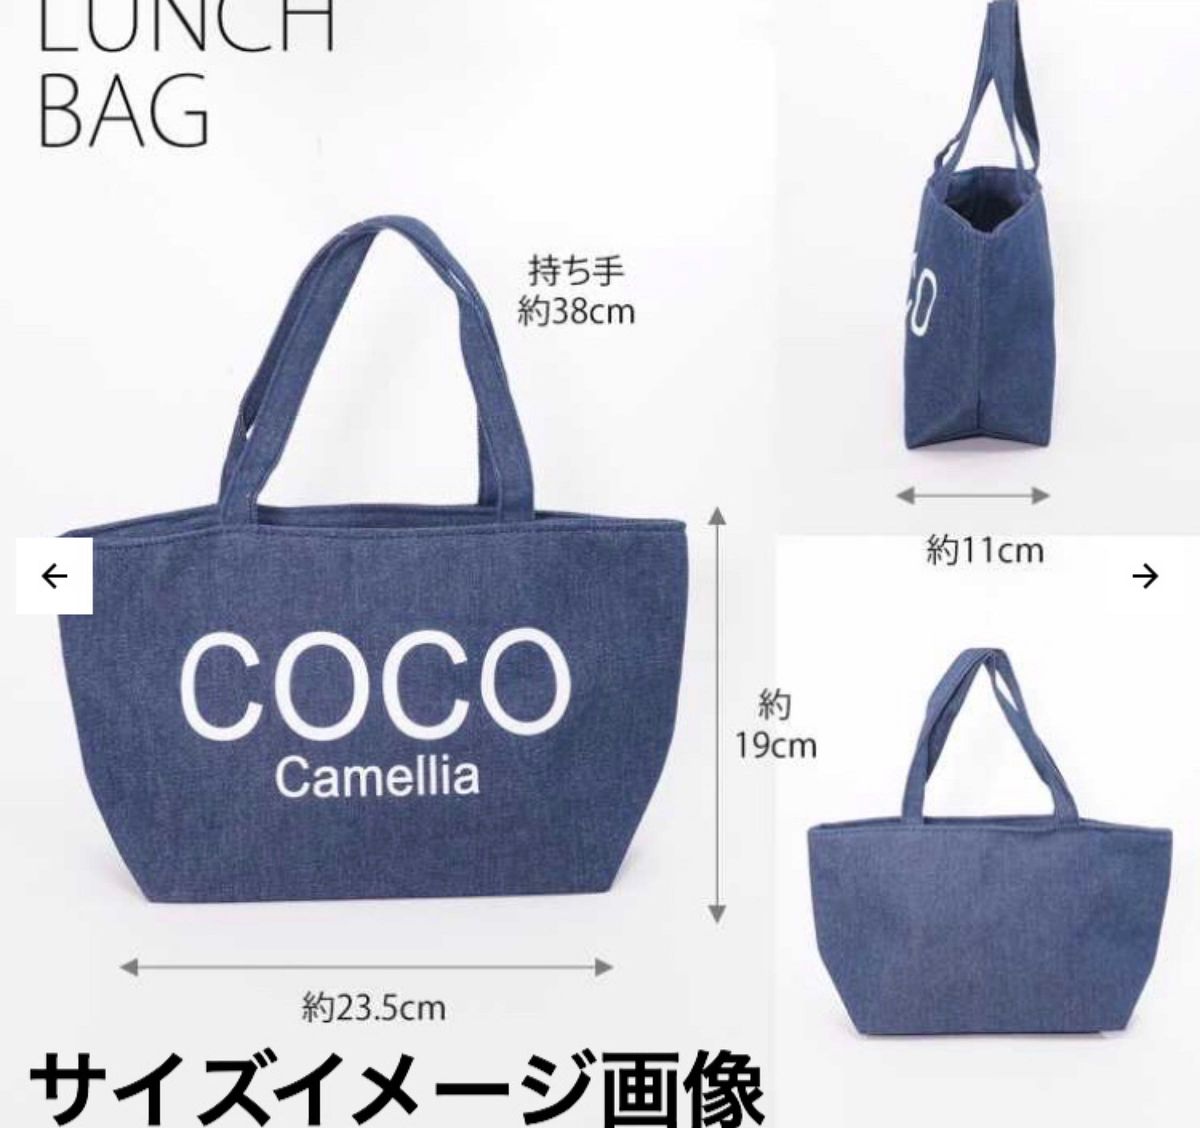 COCOワッペンランチBAG新品